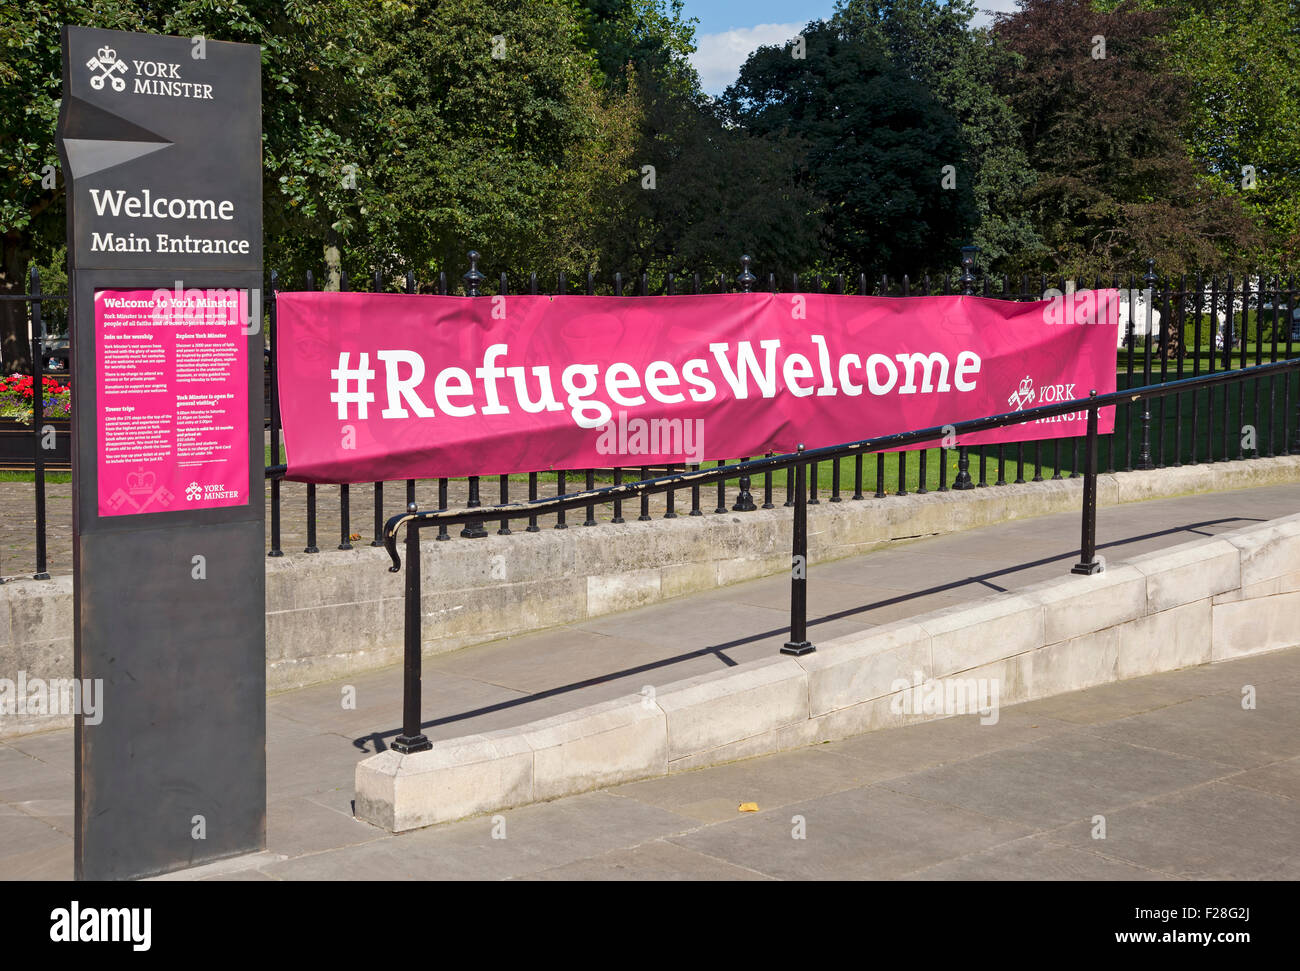 Refugees welcome banner outside the Minster York North Yorkshire England UK United Kingdom GB Great Britain Stock Photo